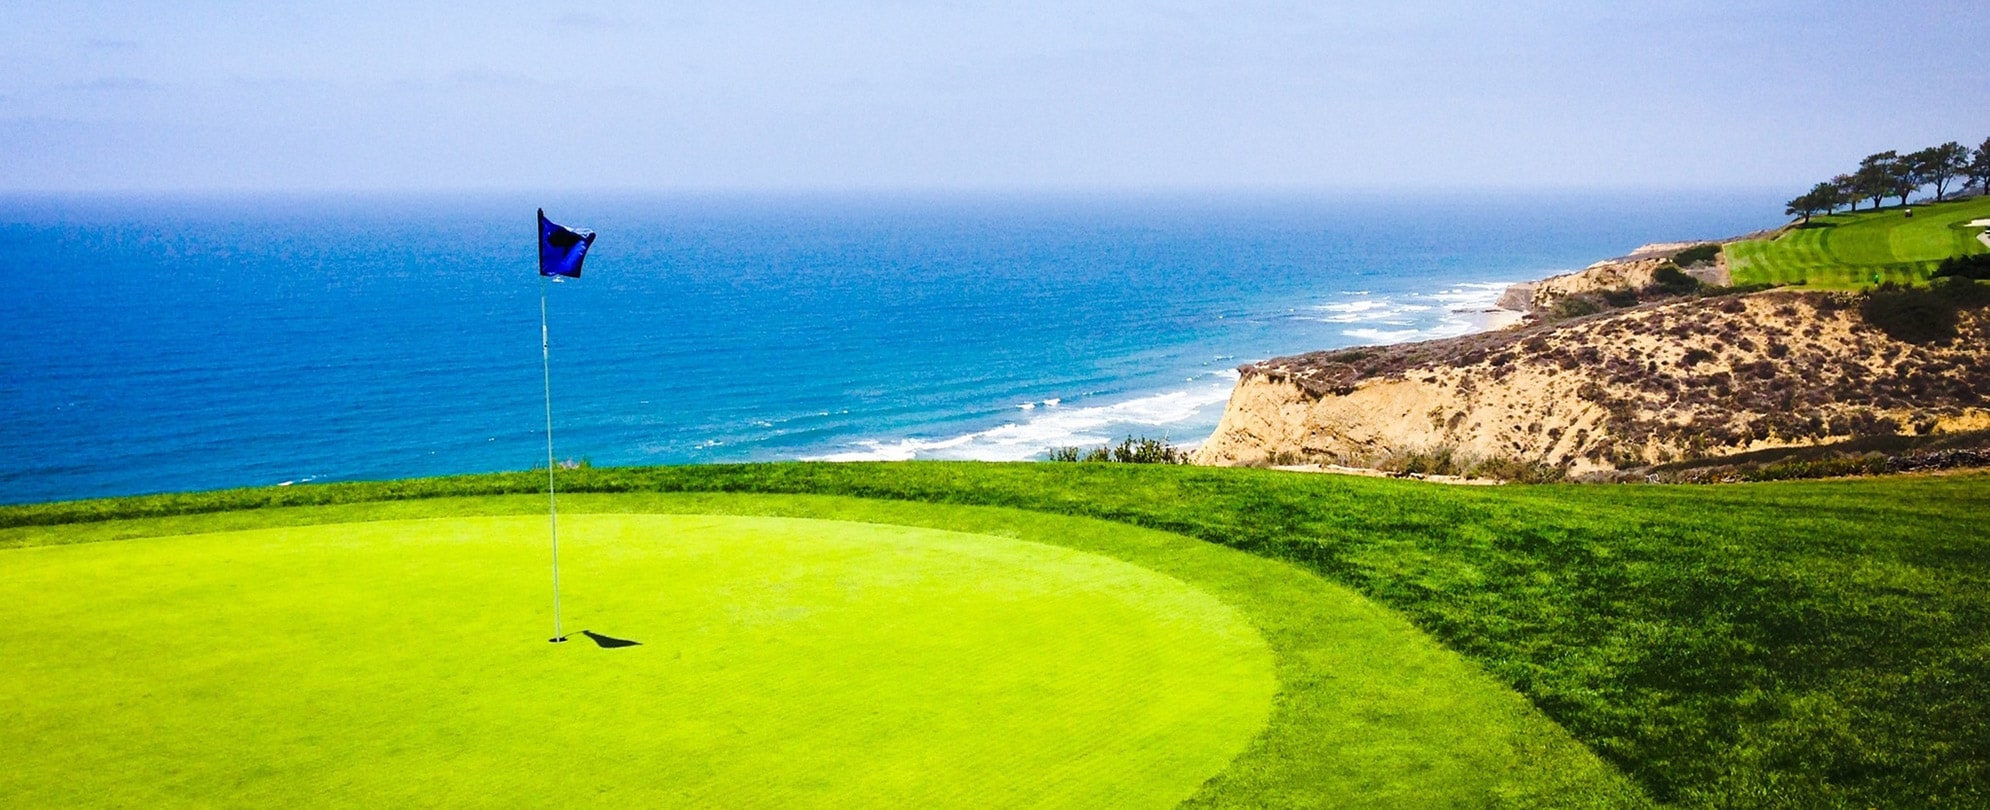 The putting green of an oceanfront golf course in San Diego, California.